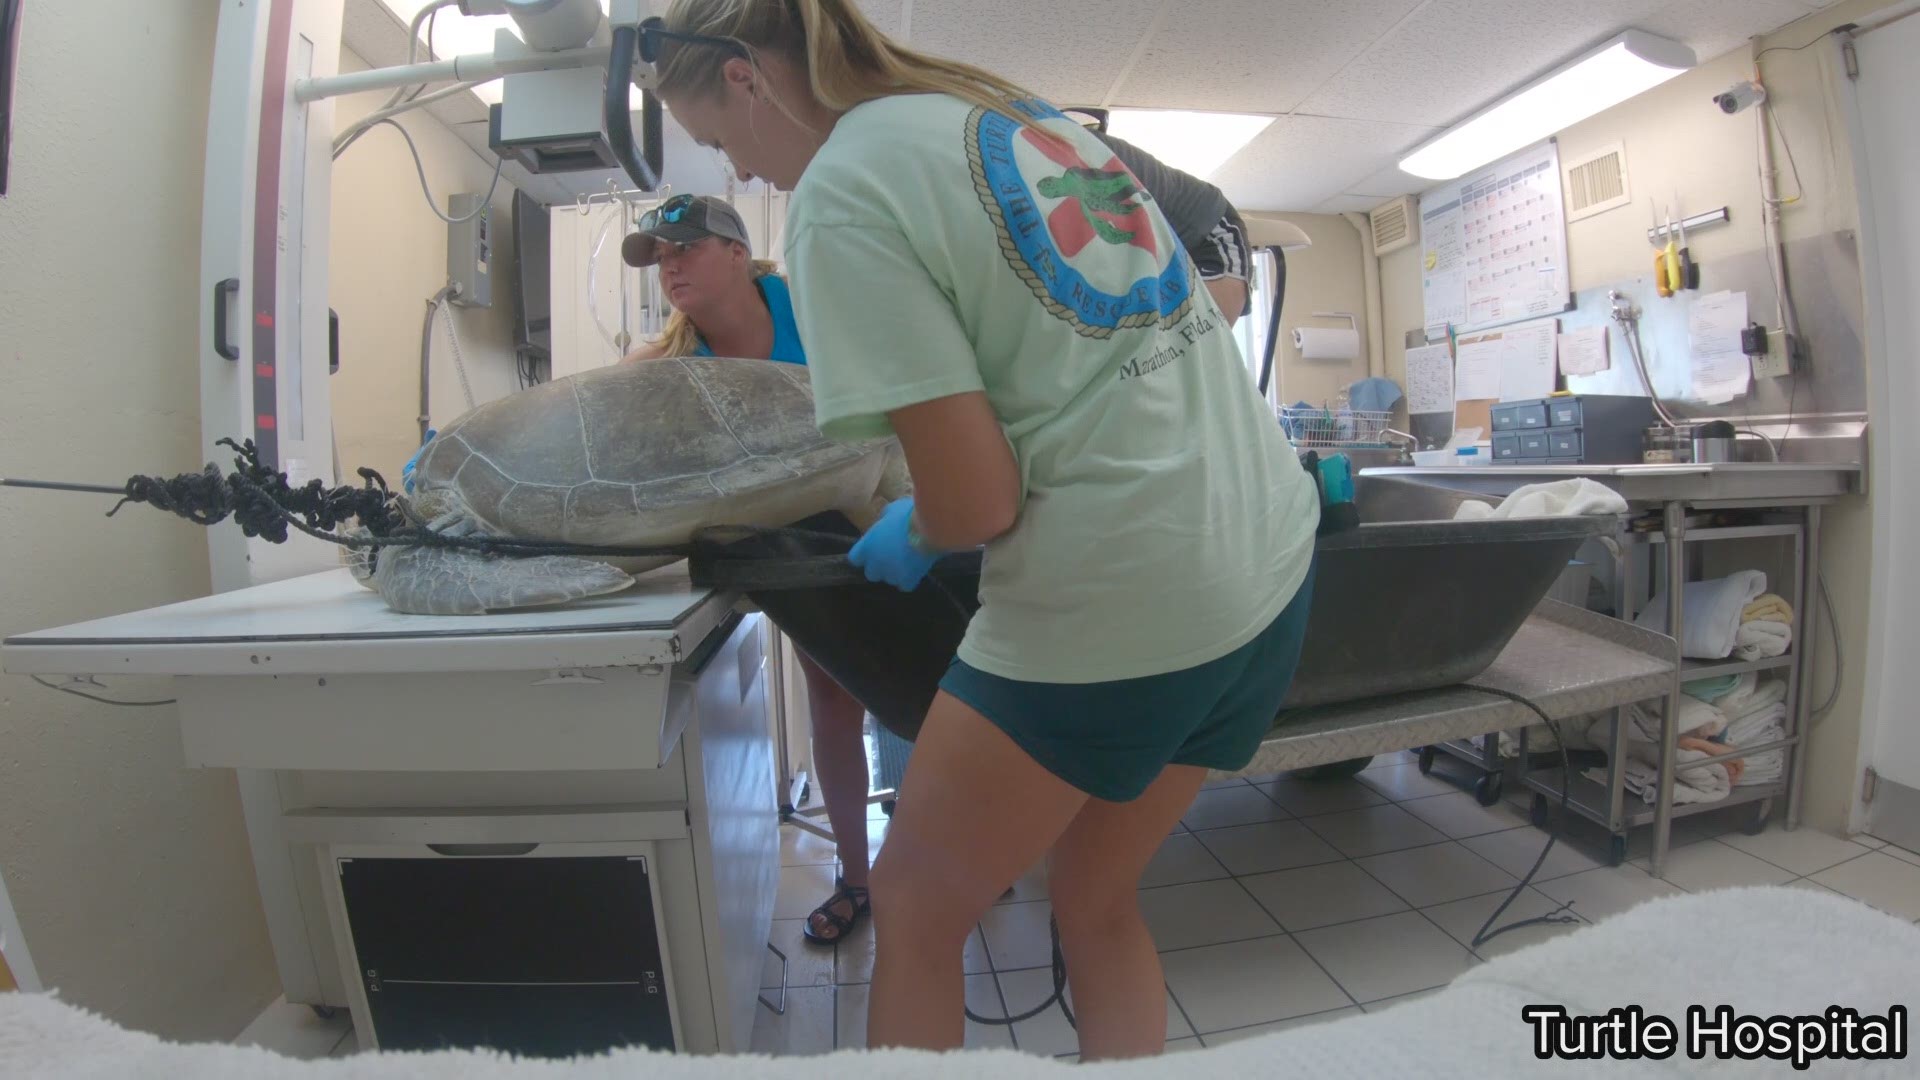 A 150-pound green sea turtle was found Saturday shot in the neck with a spear off Key Largo. 

The Turtle Hospital in the Florida Keys said this was the second sea turtle found this summer impaled with a spear. The first was found dead in June in Biscayne National Park. 

Now, authorities are looking for those responsible for injuring the green sea turtle named "Splinter."